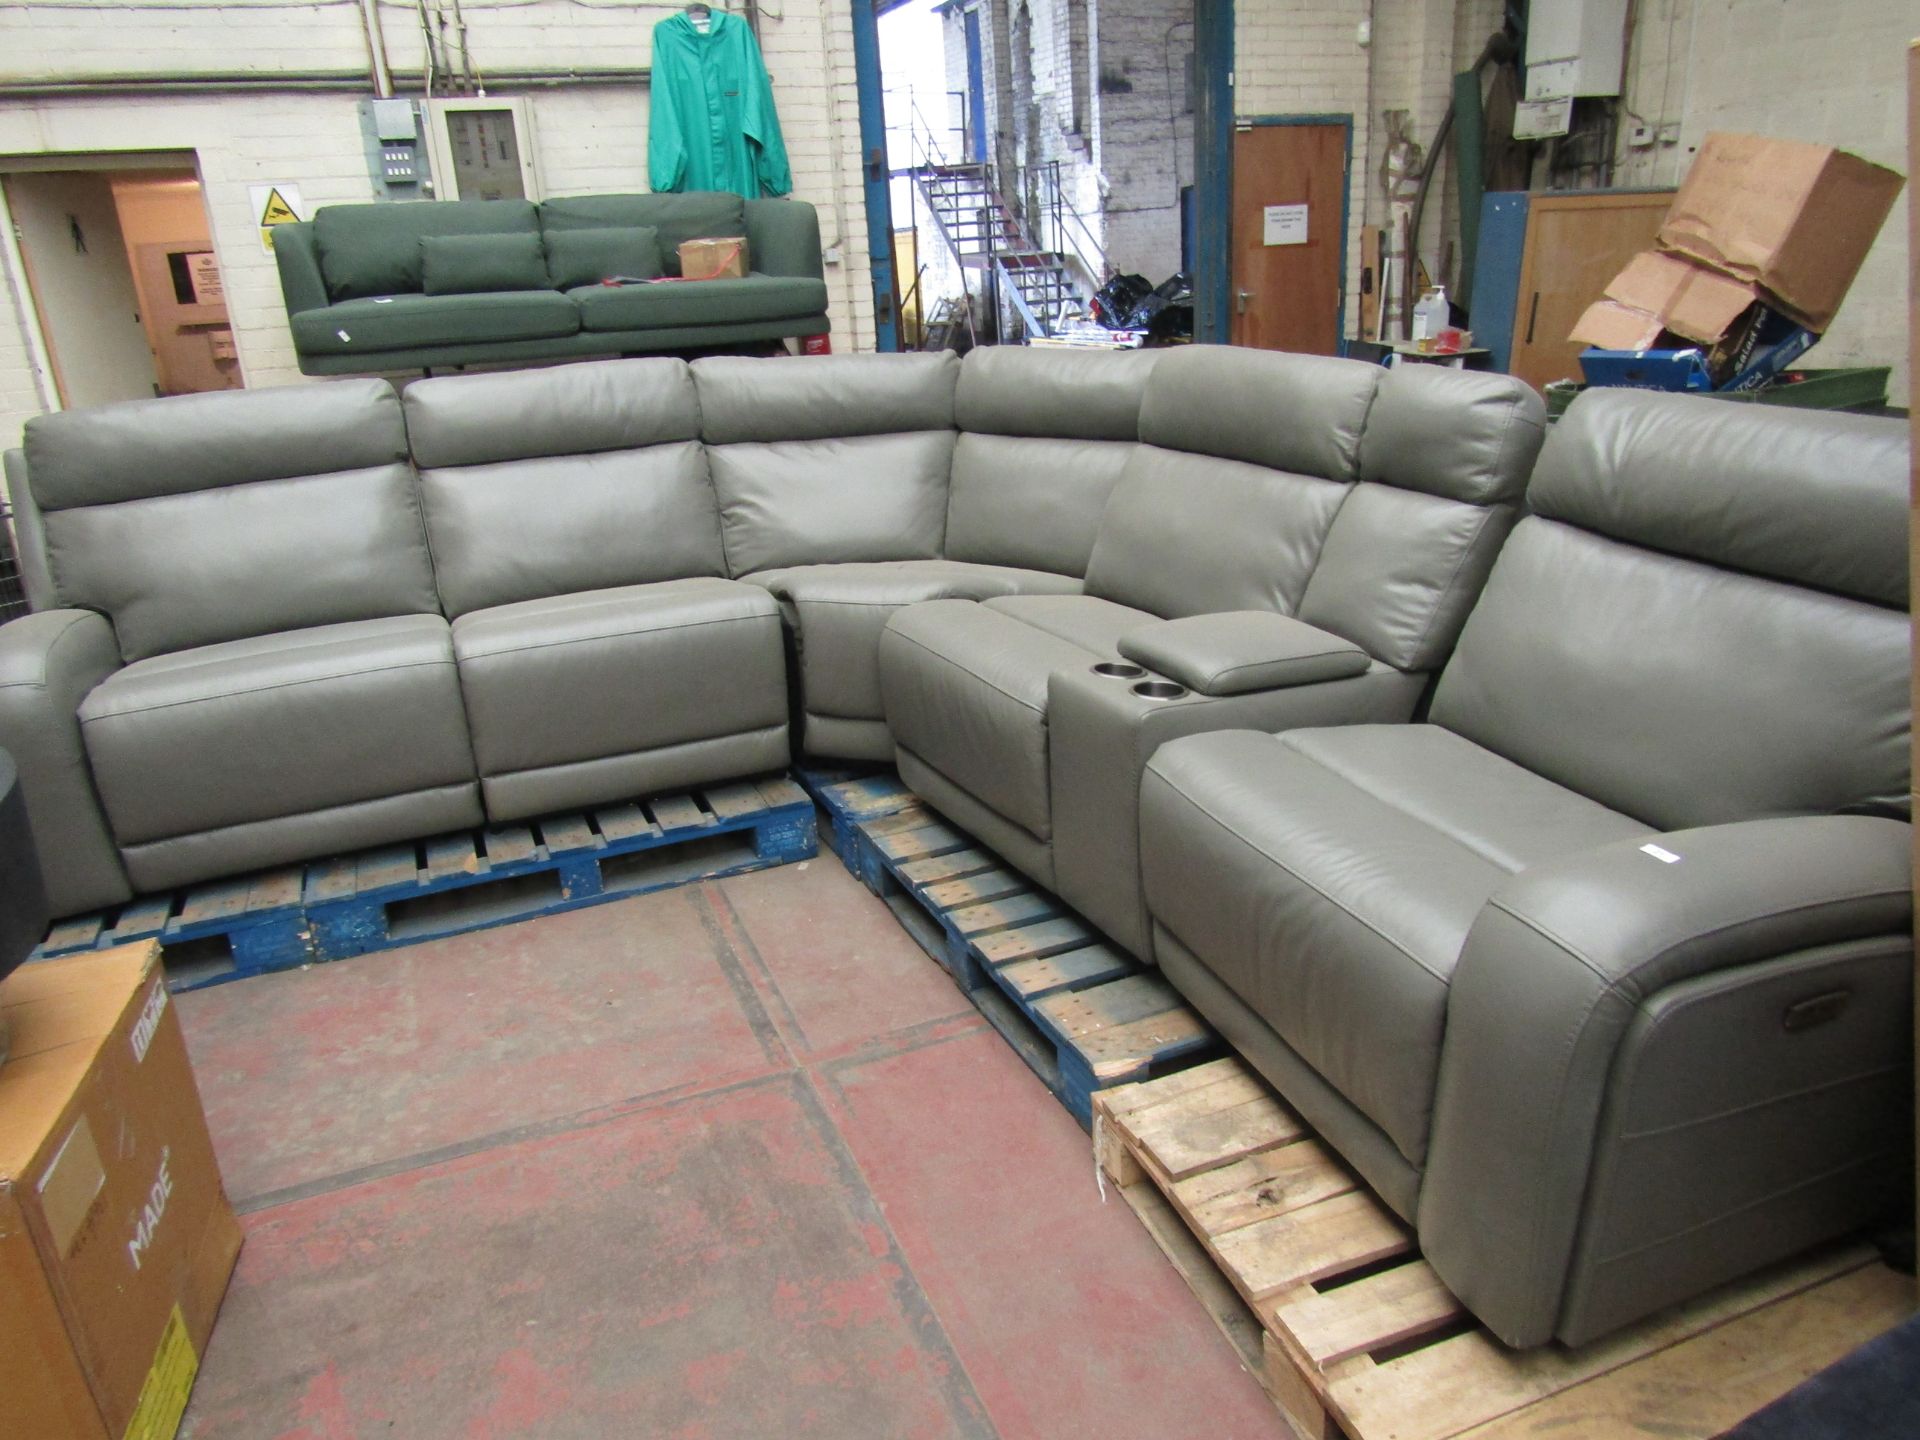 Pulaski 6 piece corner sofa, very good condition just has some minor imperfections such as a few